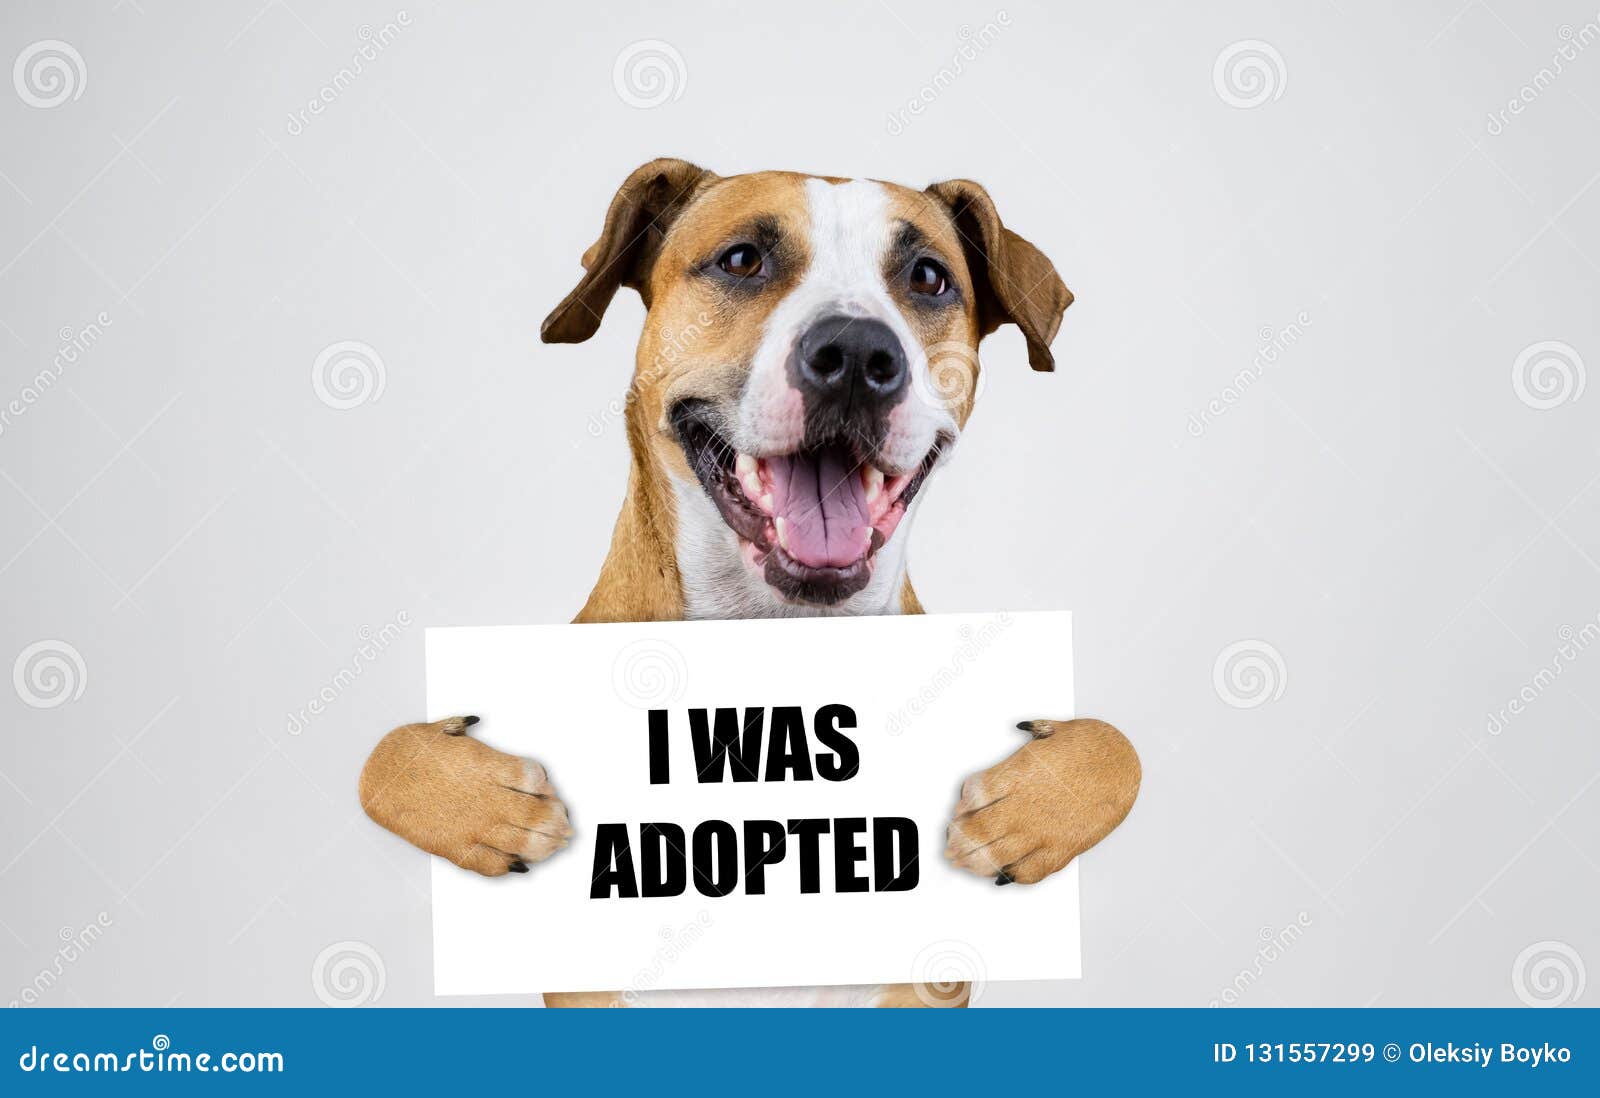 pet adoption concept with staffordshire terrier dog. funny pitbull terrier holds